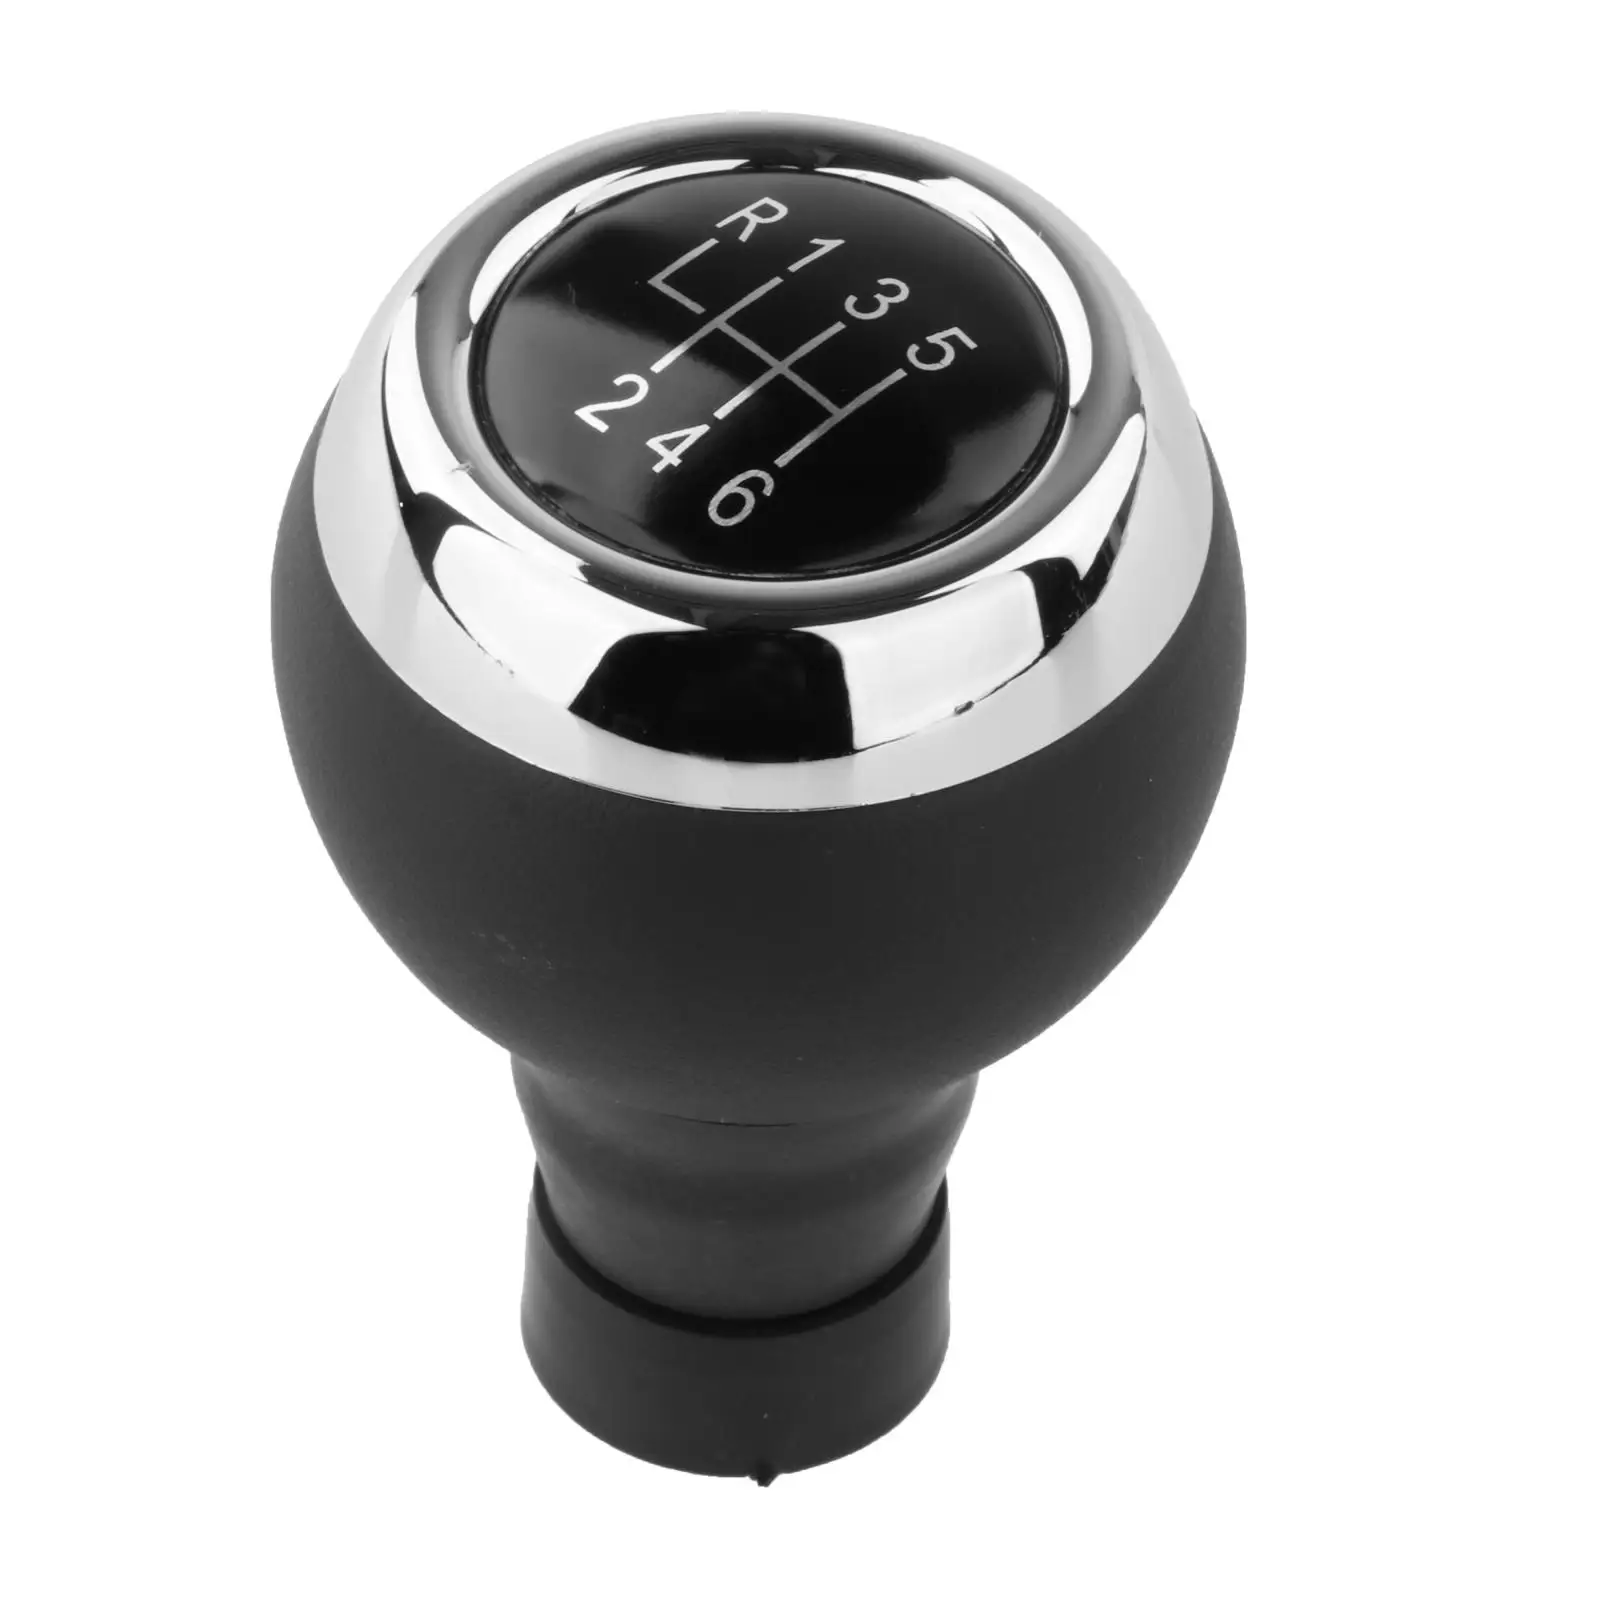 Gear Shift Knob Head Manual Fit for BMW Mini Accessories Easy to Install